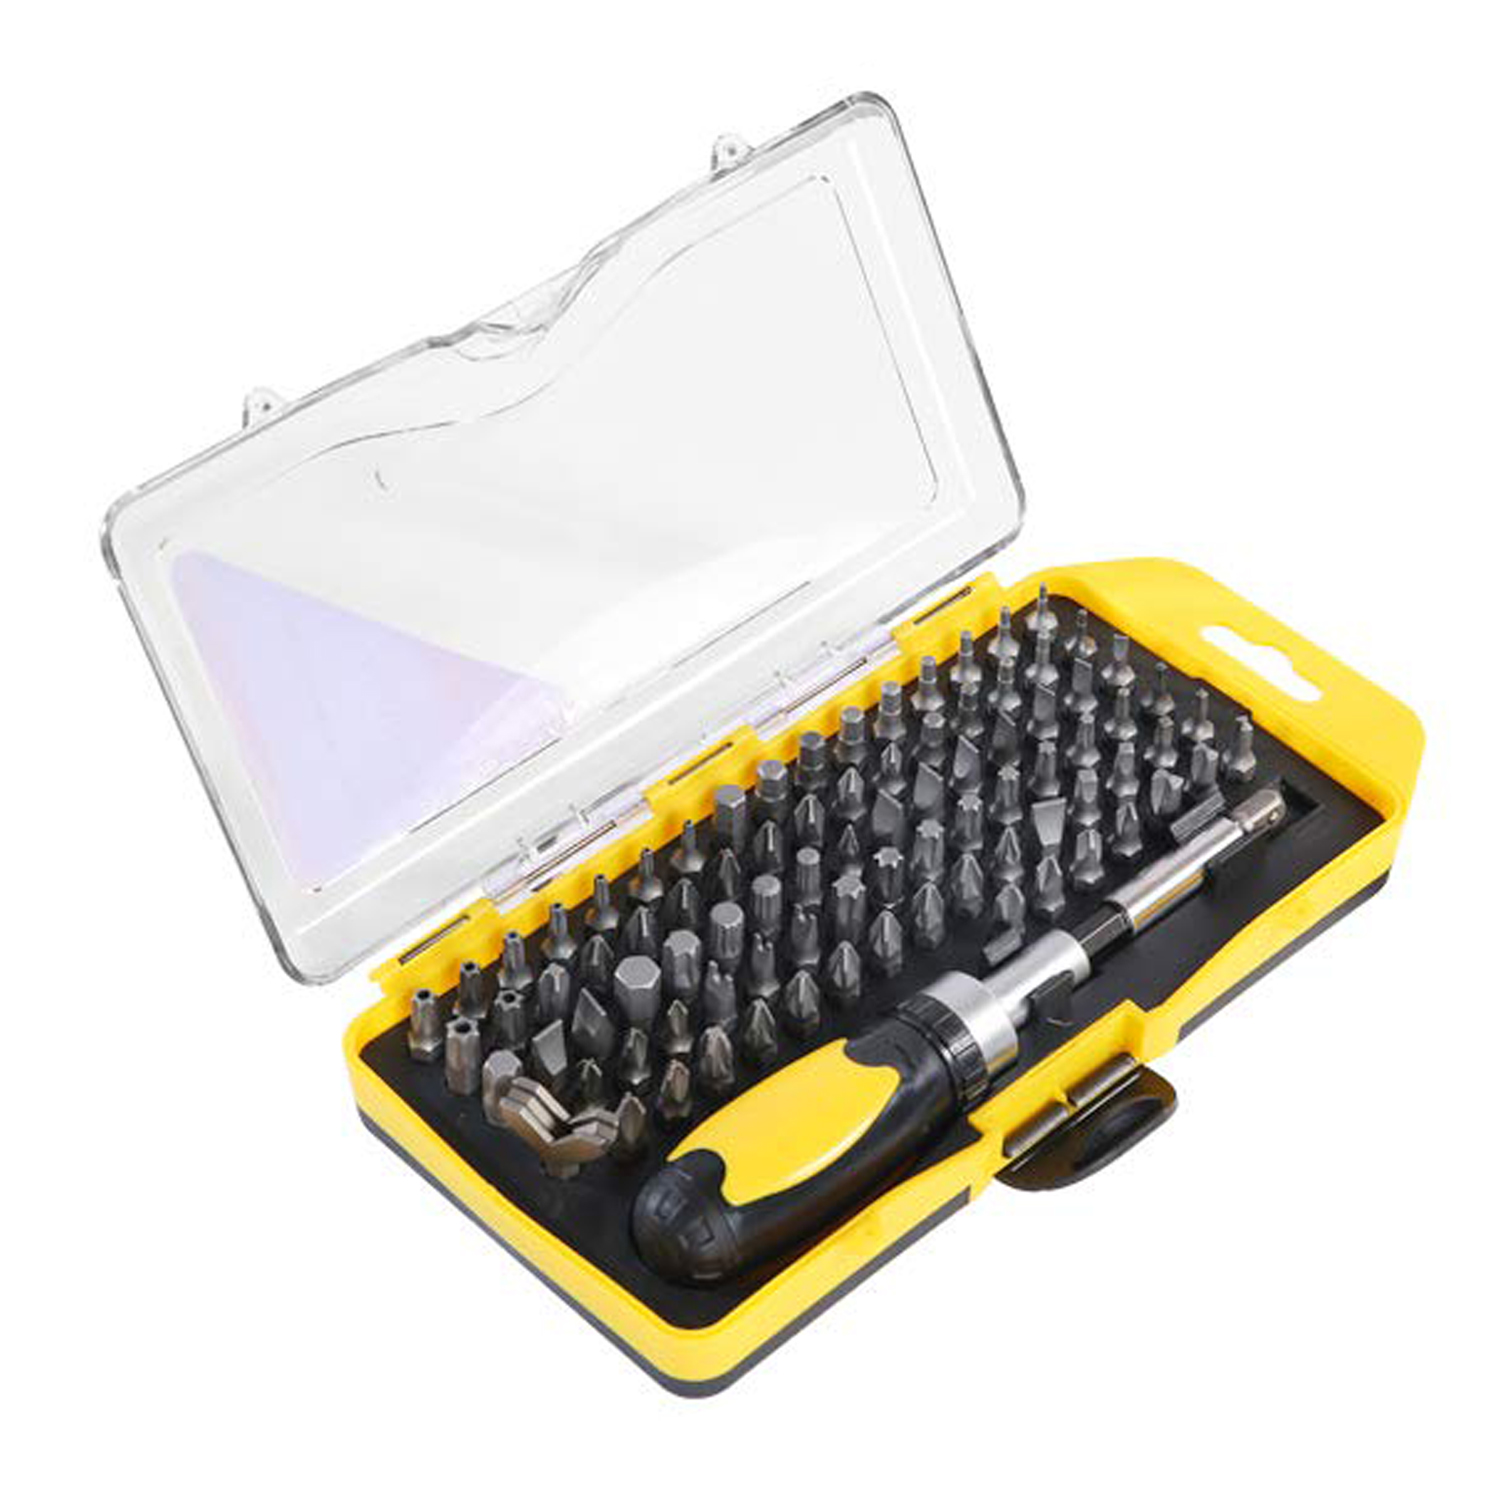 Altatac Professional 89 in 1 Ratcheting With Screwdriver Kit With Drill Bit Sets